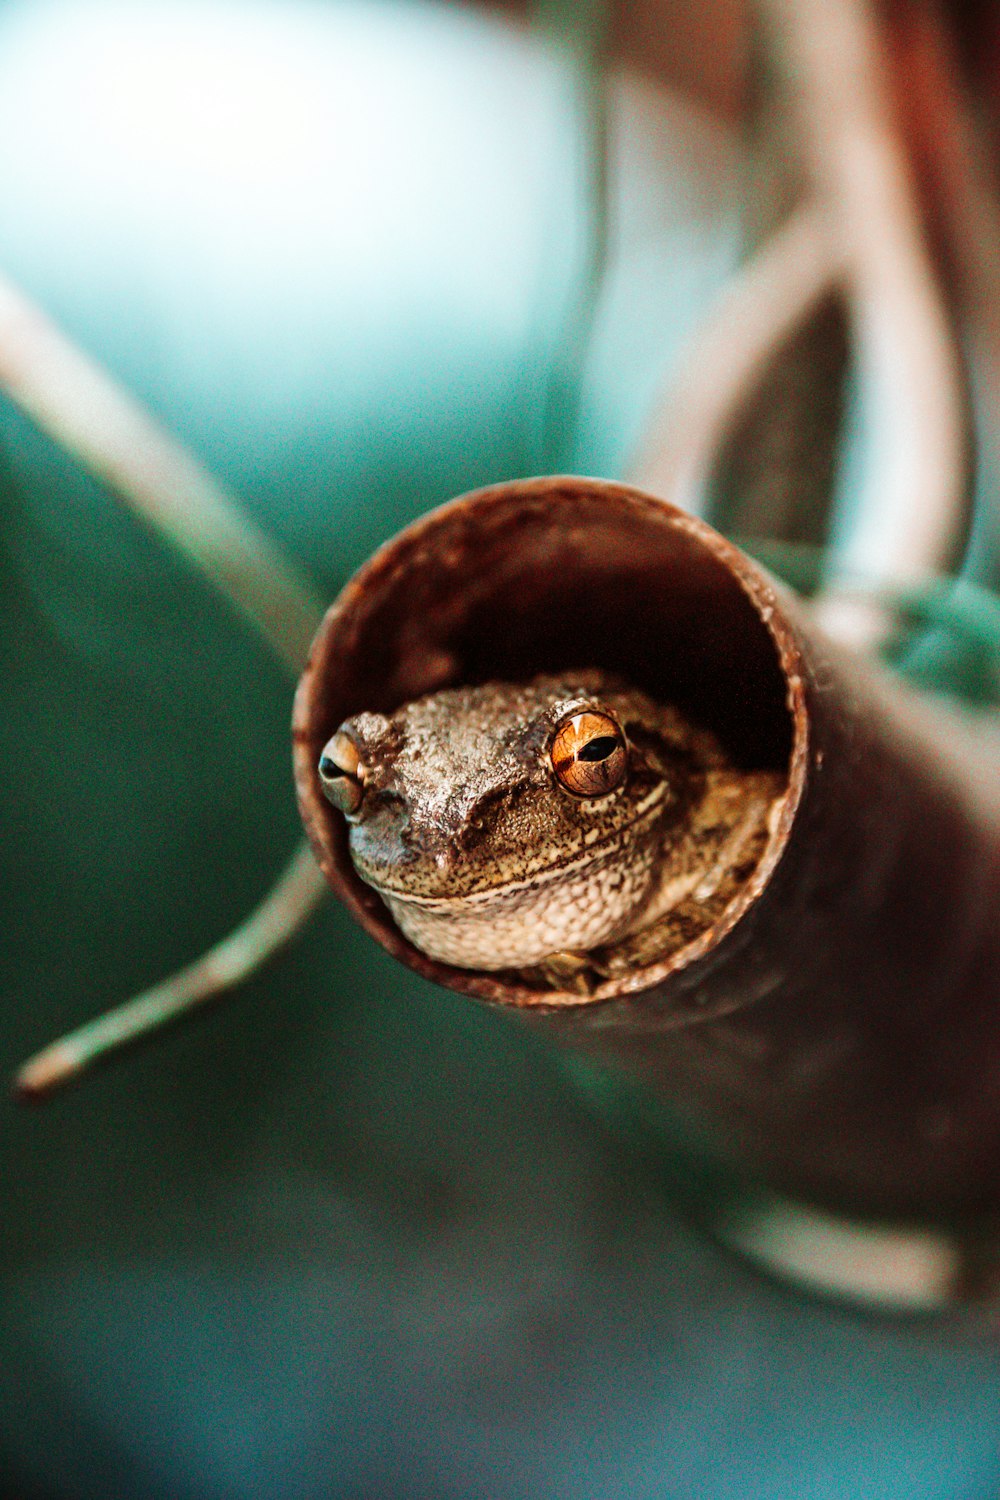 a close up of a frog in a tube